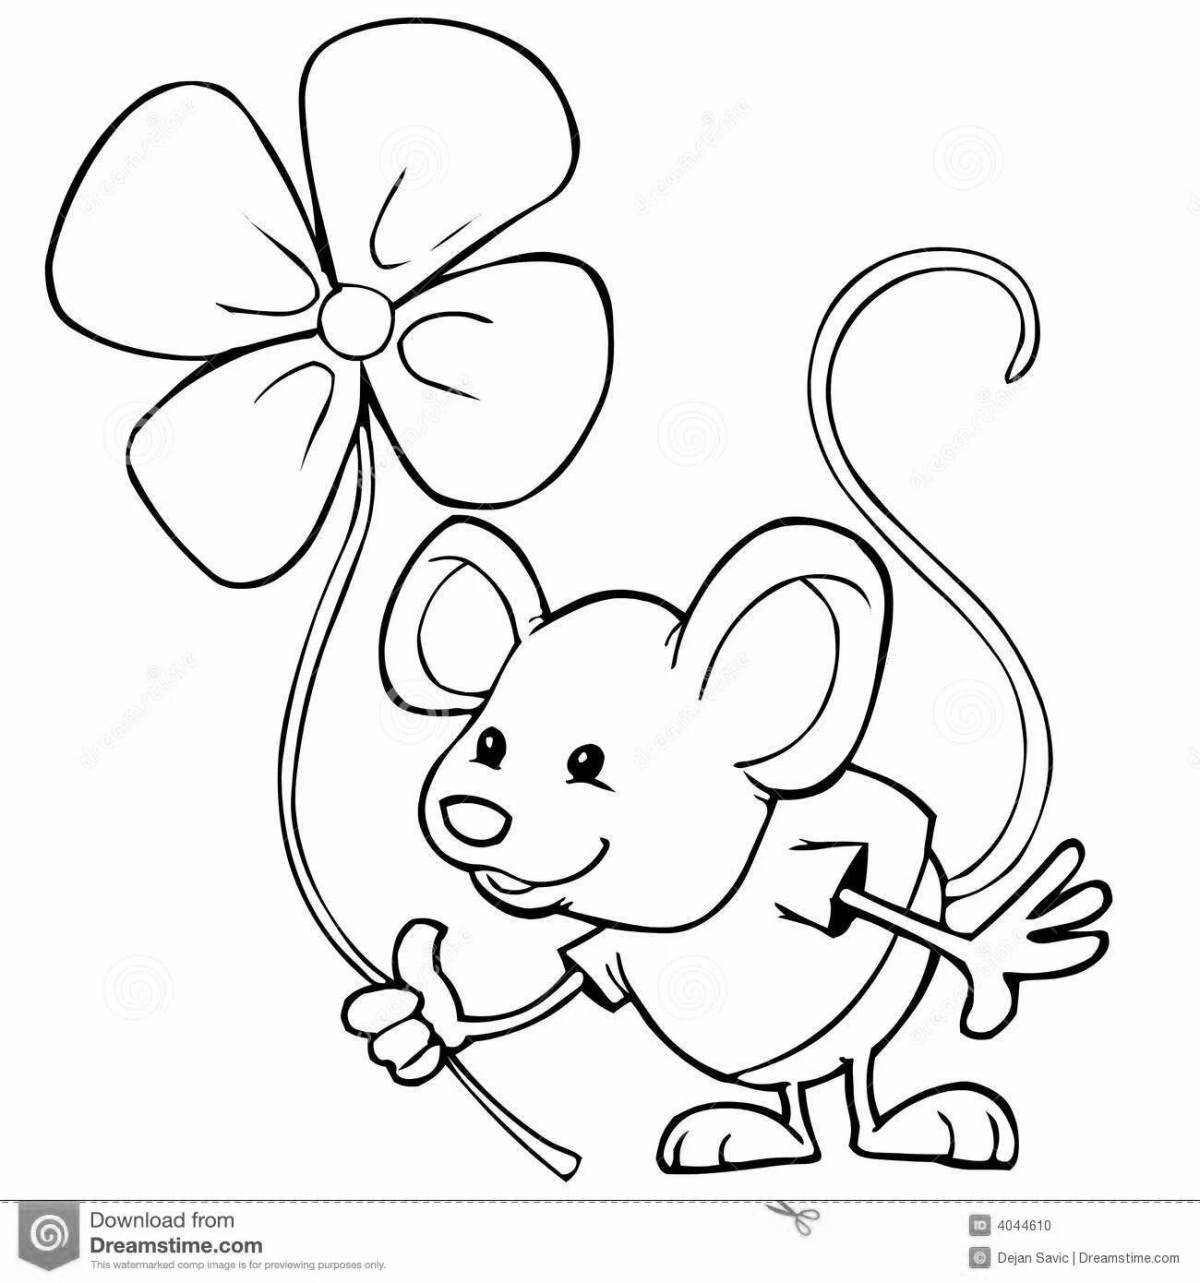 Humorous mouse and bear coloring book